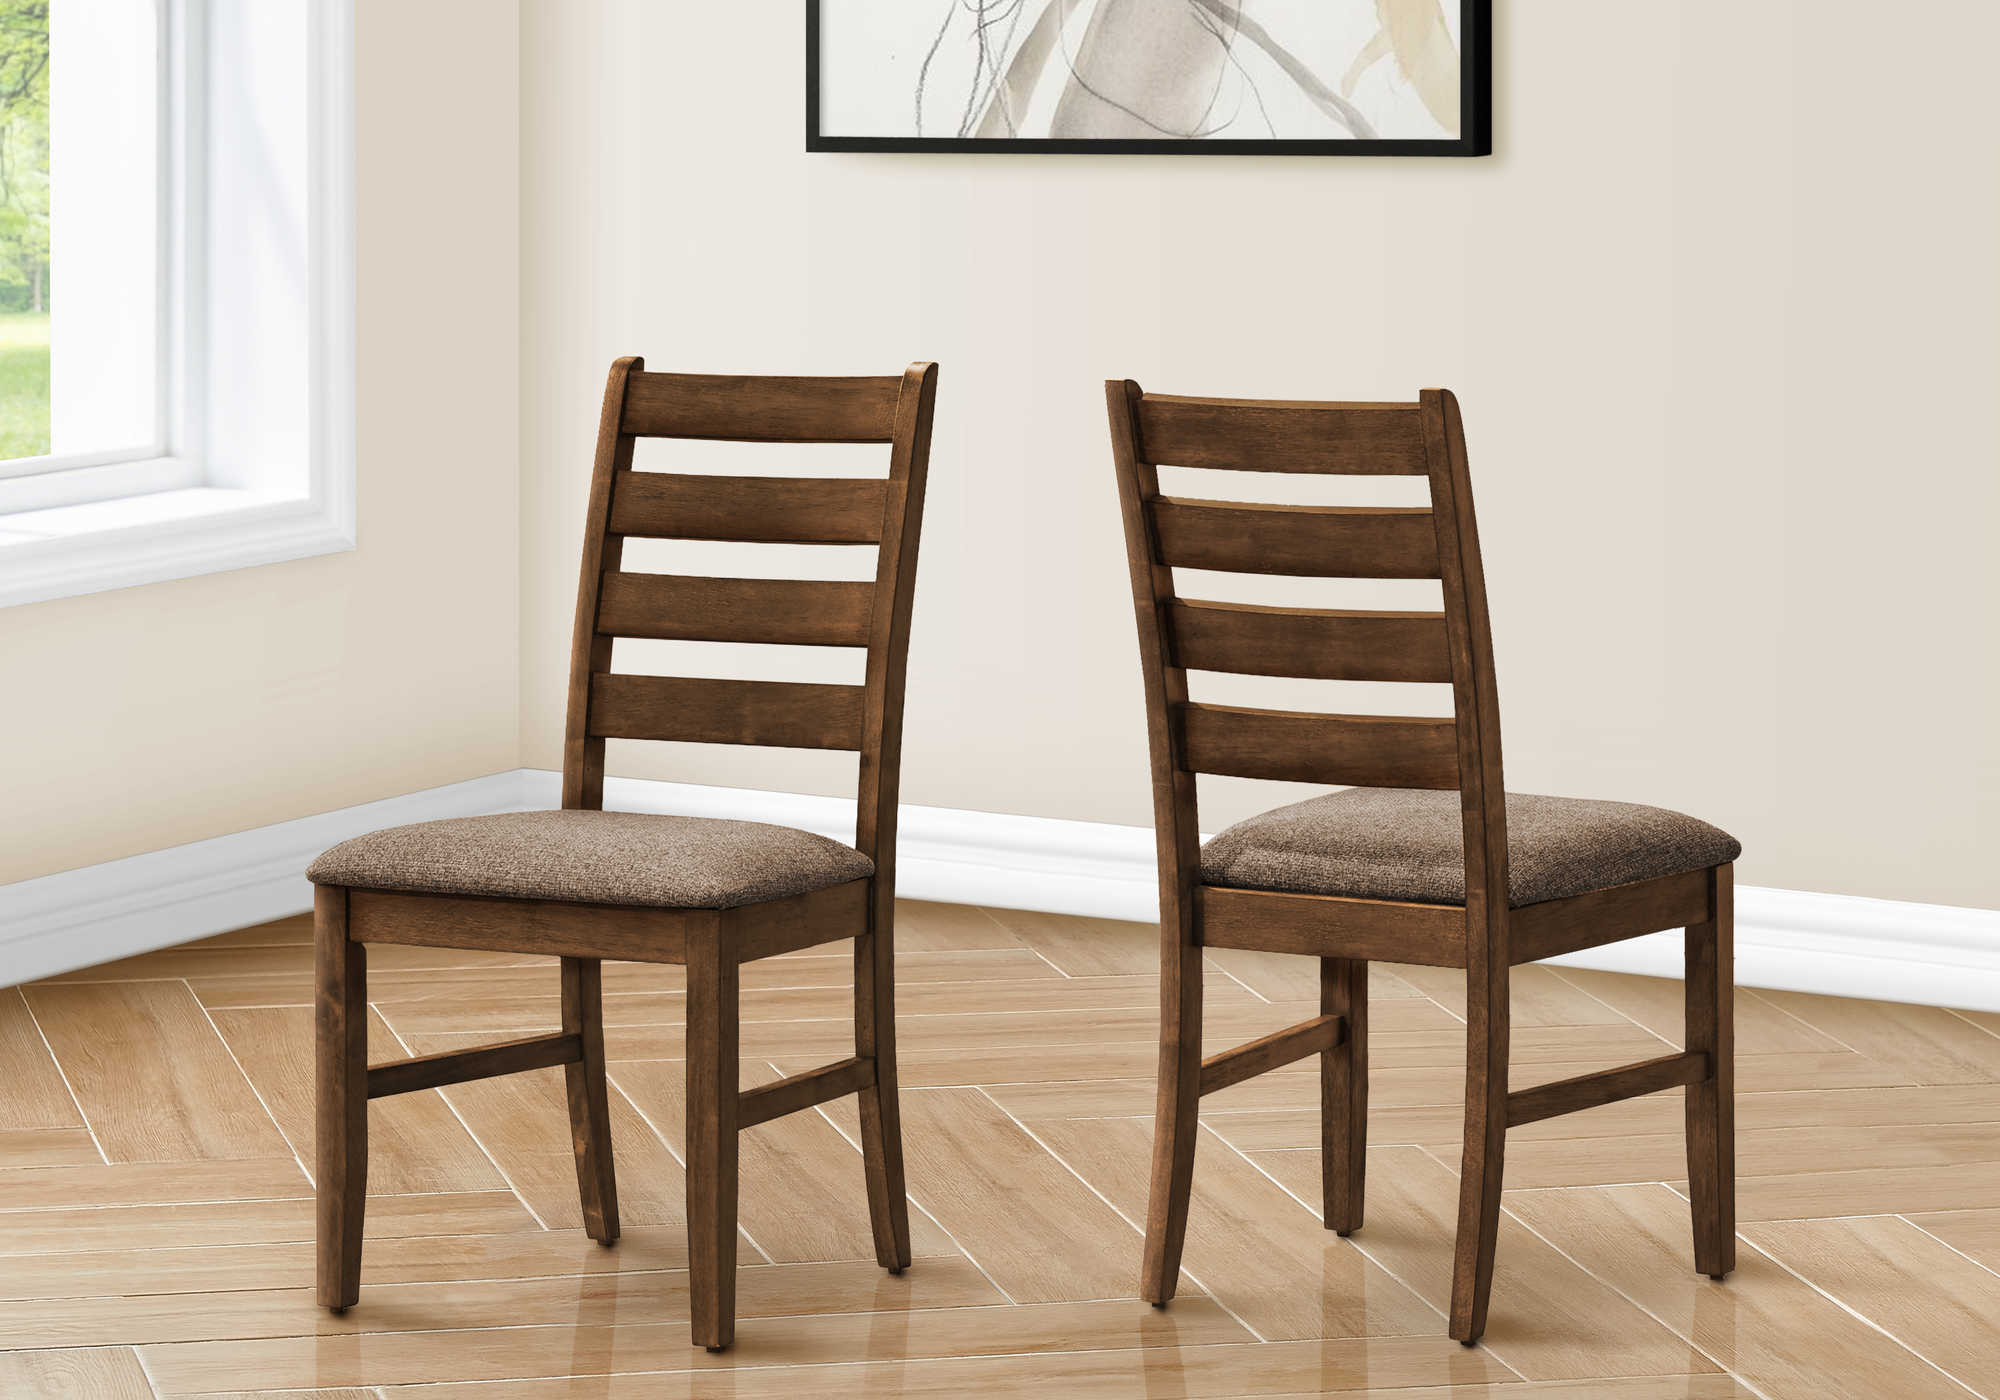 DINING CHAIR - 2PCS / 38"H UPHOLSTERED BROWN FABRIC